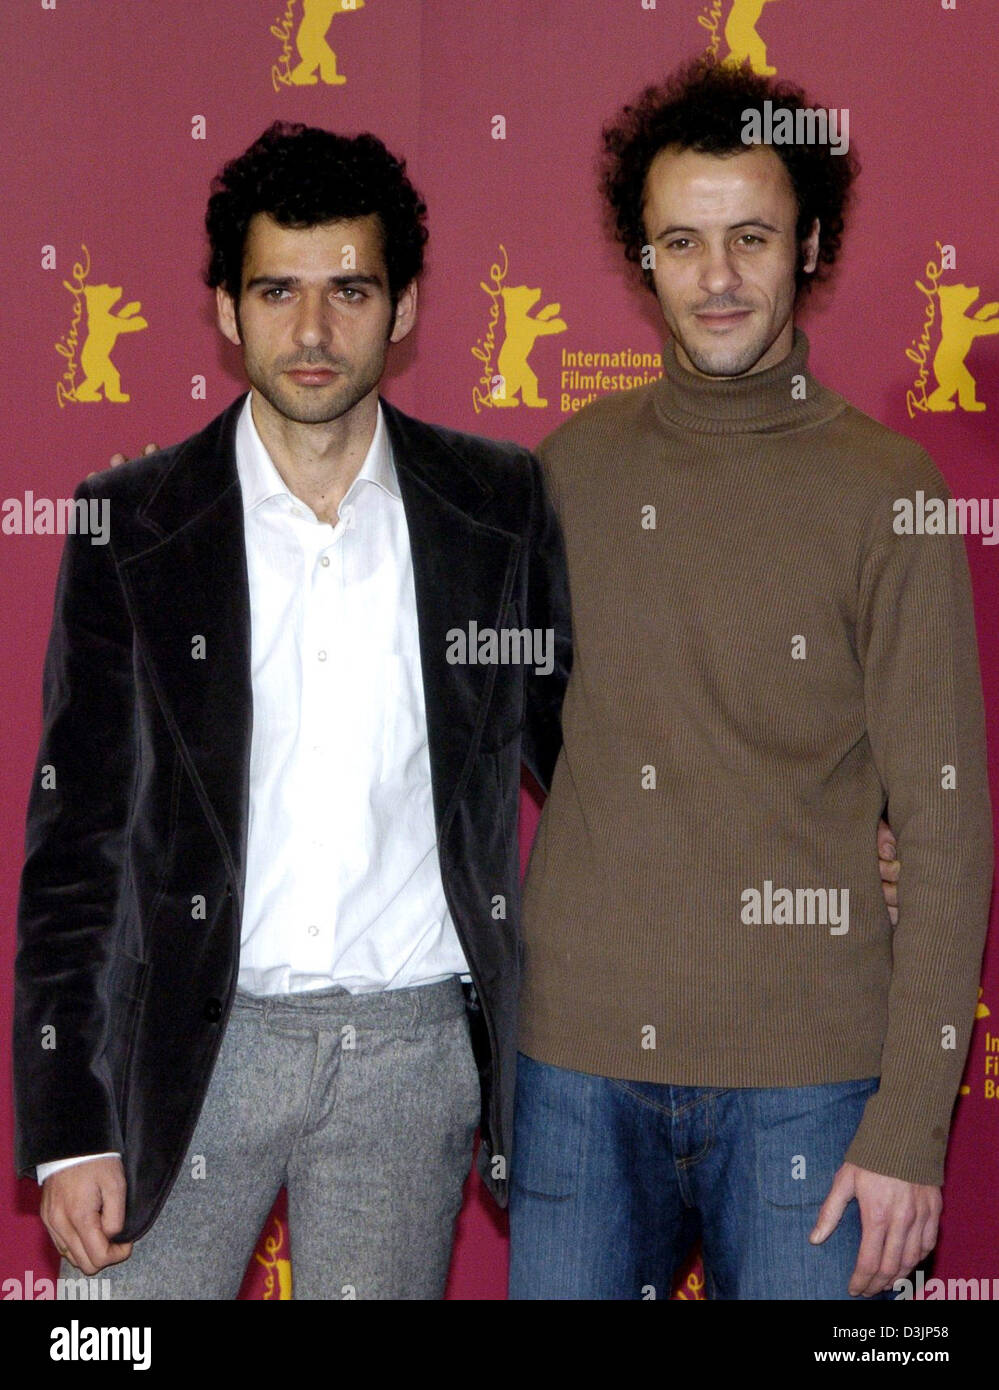 (dpa) - Palestinian actors Kais Nashif (L) and Ali Suliman smile during the press conference for their movie 'Paradise Now ' at the Berlinale Filmfestival in Berlin, Germany, 14 February 2005. The German-Dutch-French production centres around a young Palestinian woman and the search for her groom. Stock Photo